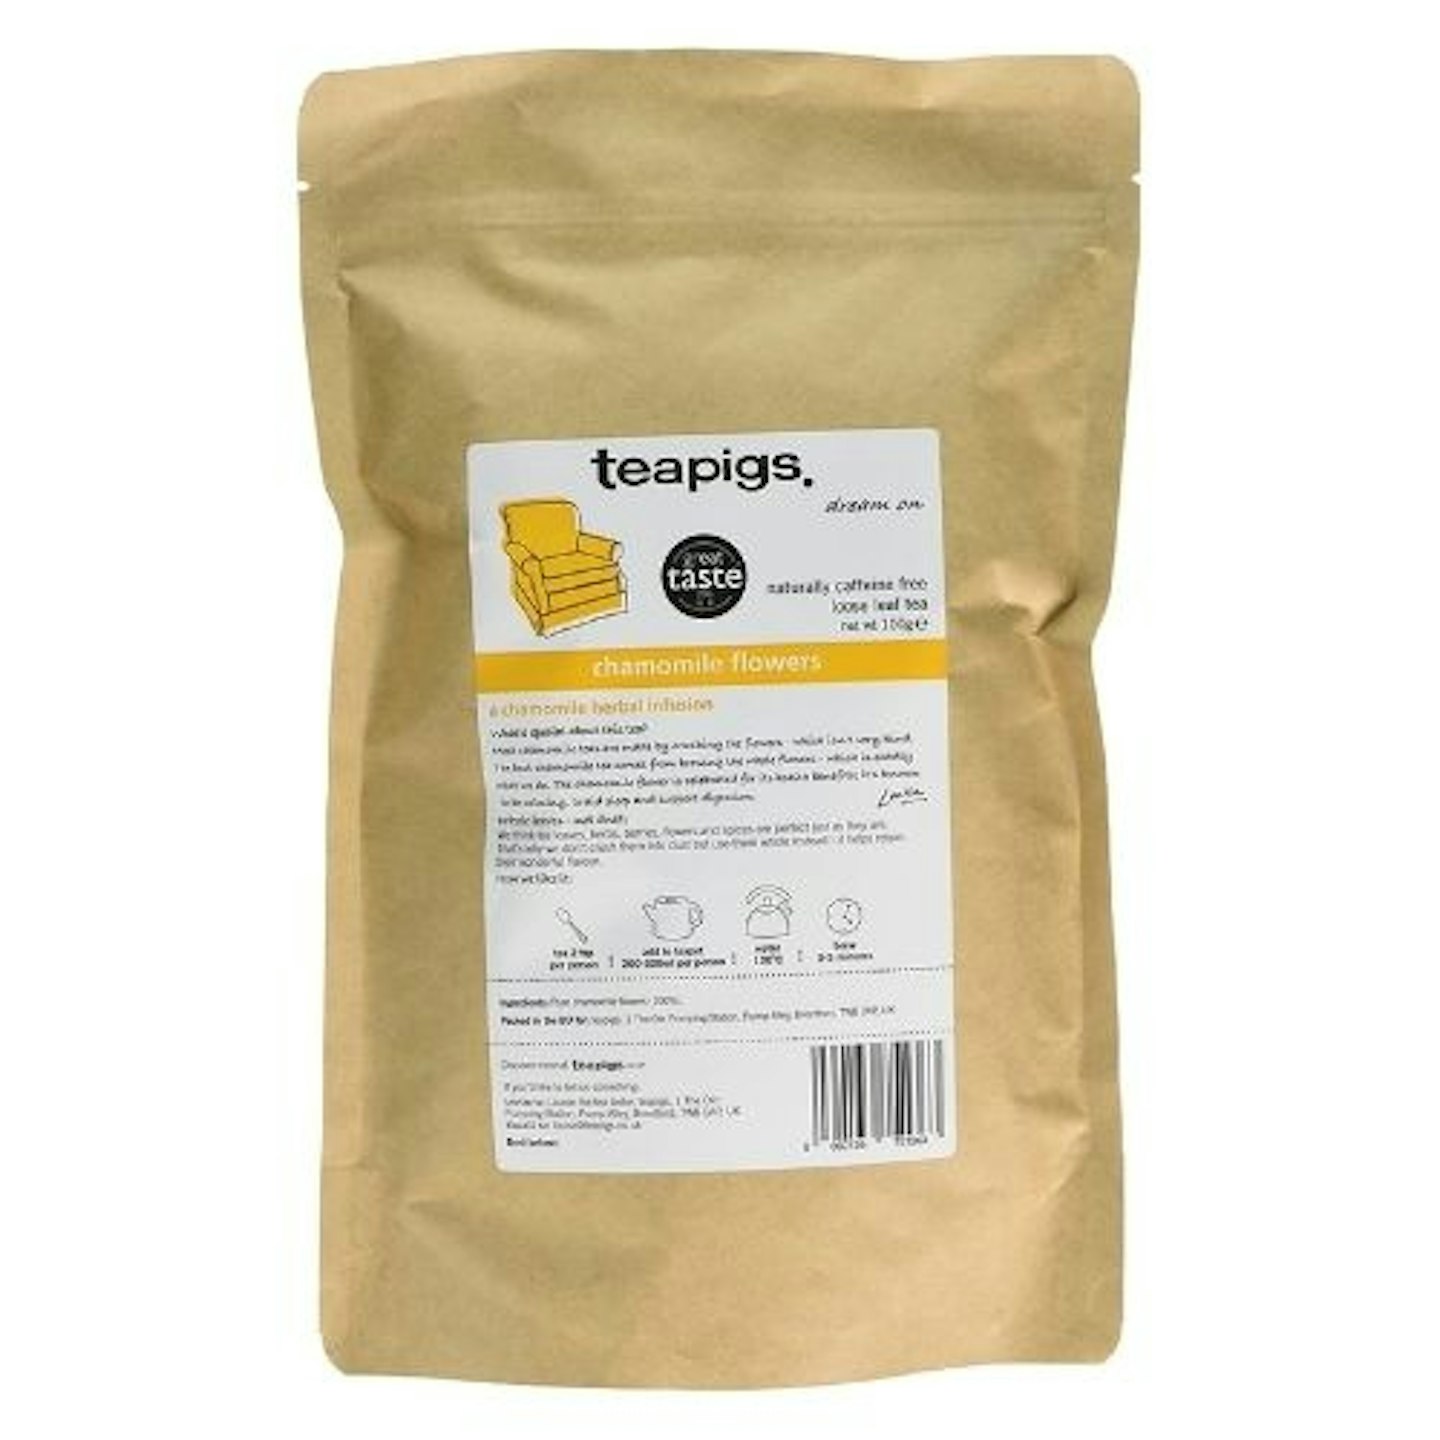  Teapigs Chamomile Flowers Loose Tea Made with Whole Flowers (1 Pack of 100g)